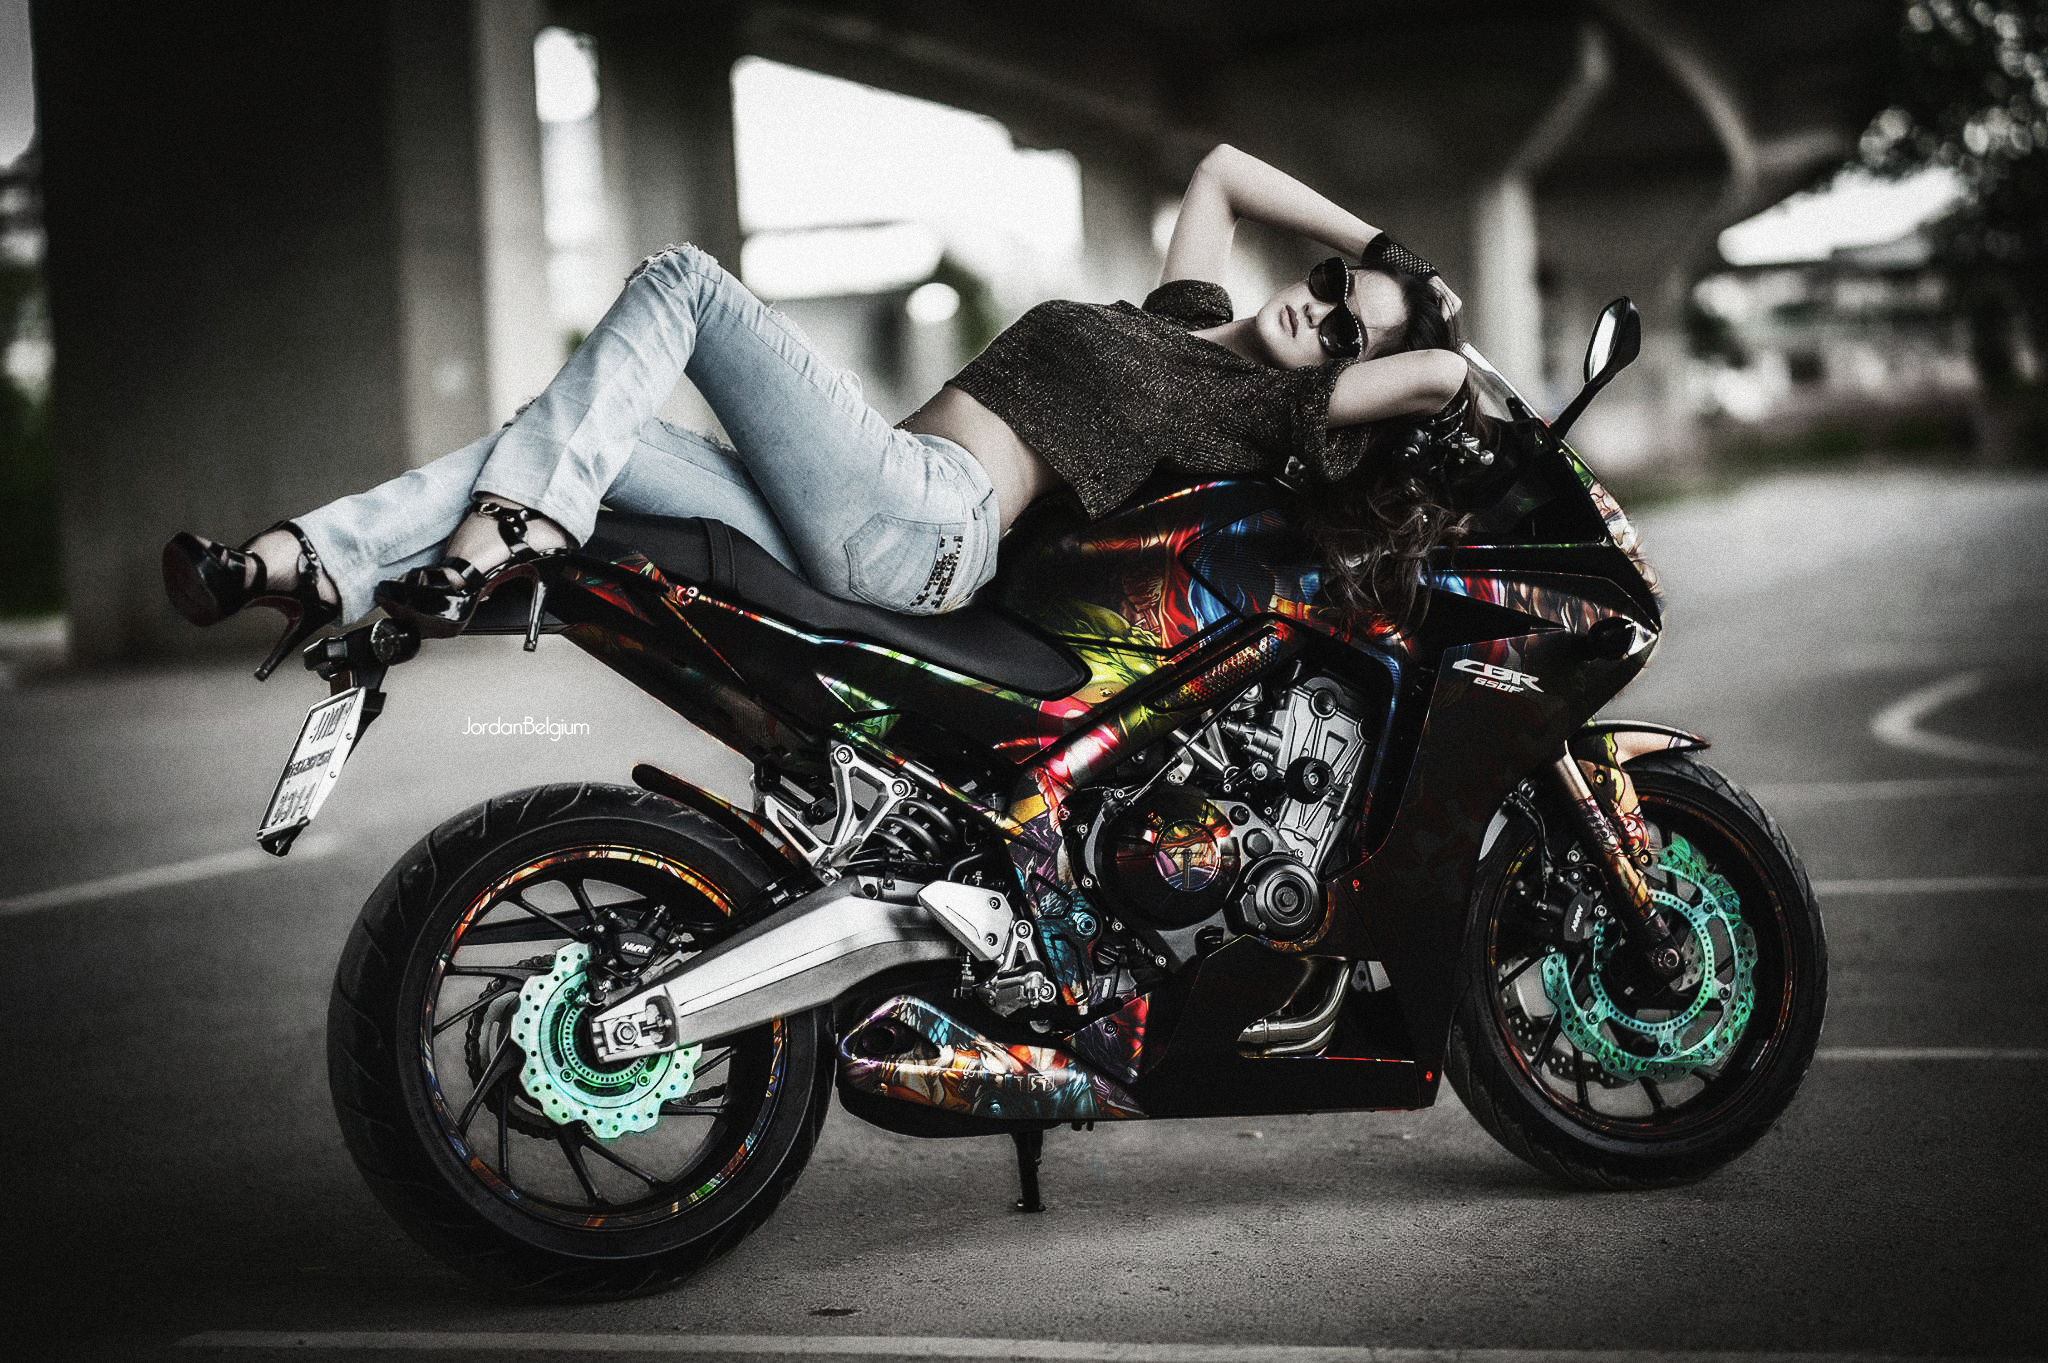 People 2048x1363 women with motorcycles motorcycle photo manipulation jordan belgium digital art women with glasses jeans high heels women vehicle Honda CBR selective coloring women with shades heels black heels black motorcycles women outdoors urban model